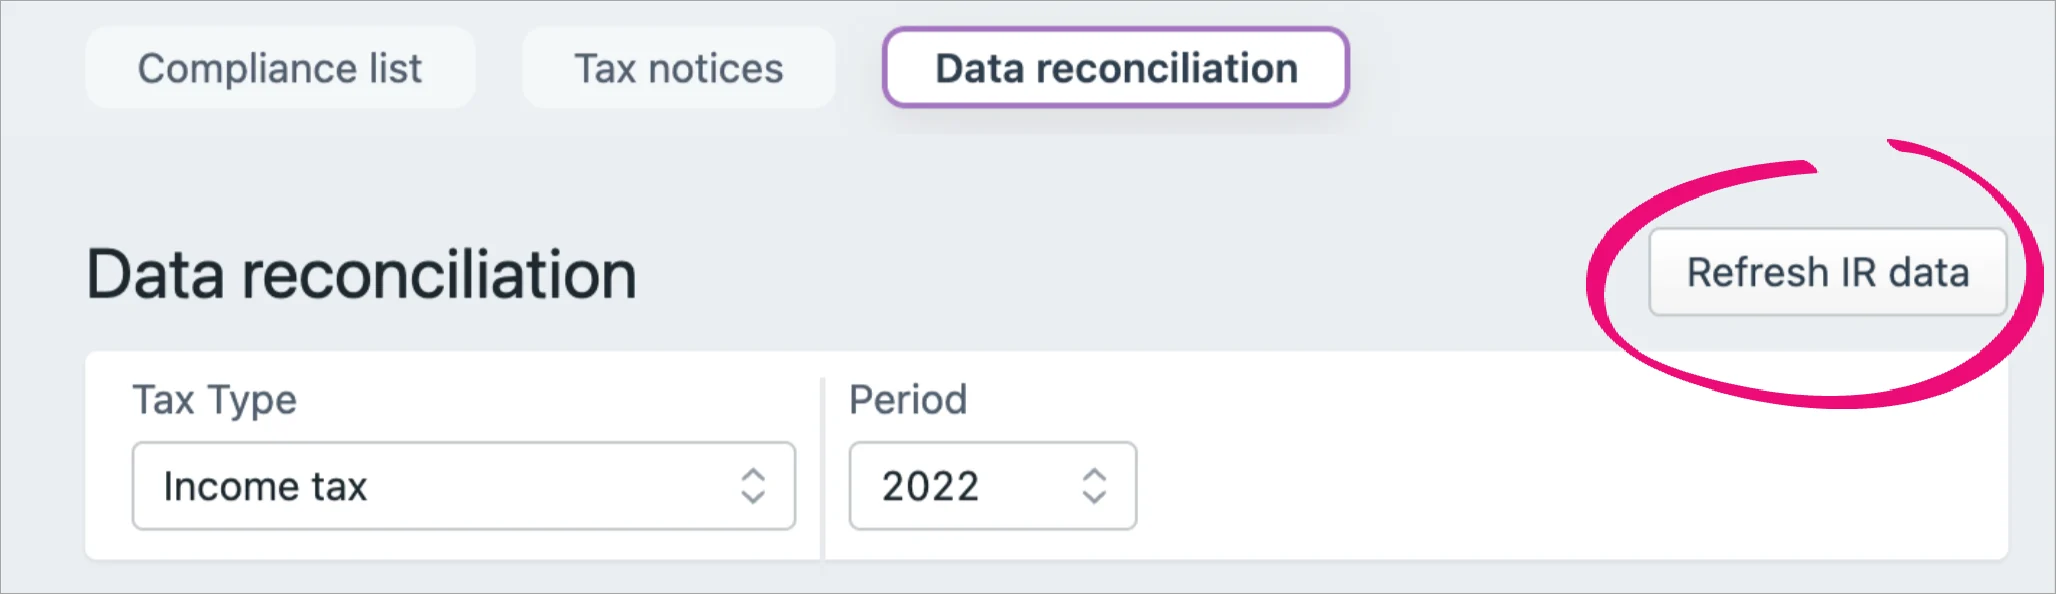 Refresh IR data button highlighted in the top right of the Data reconciliation page.